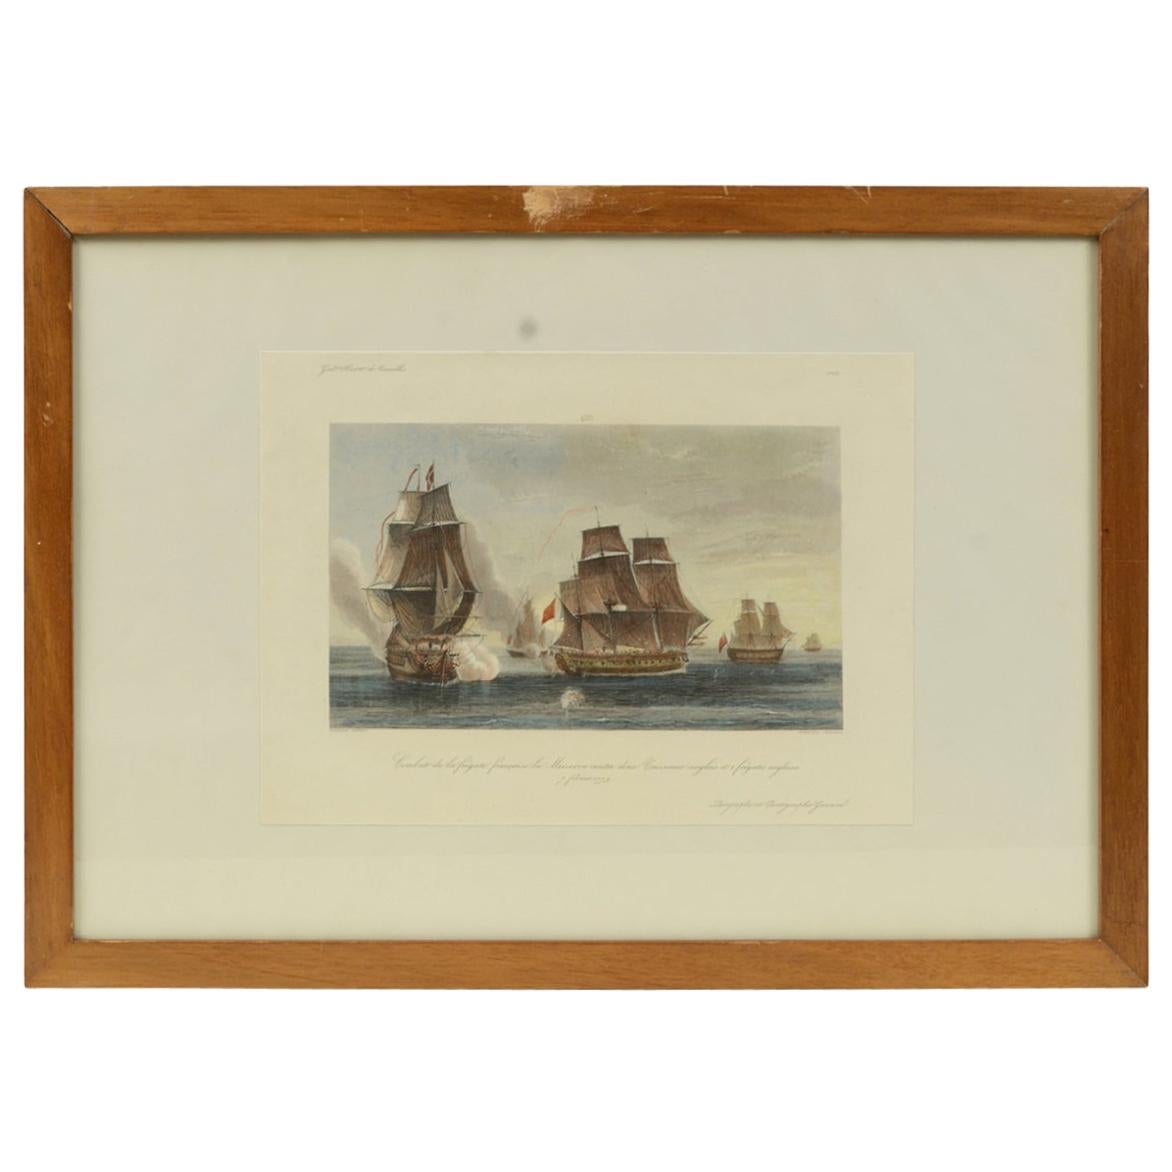 1900 Vintage Lithographic Print of the French Frigate Minerva Oakwood frame